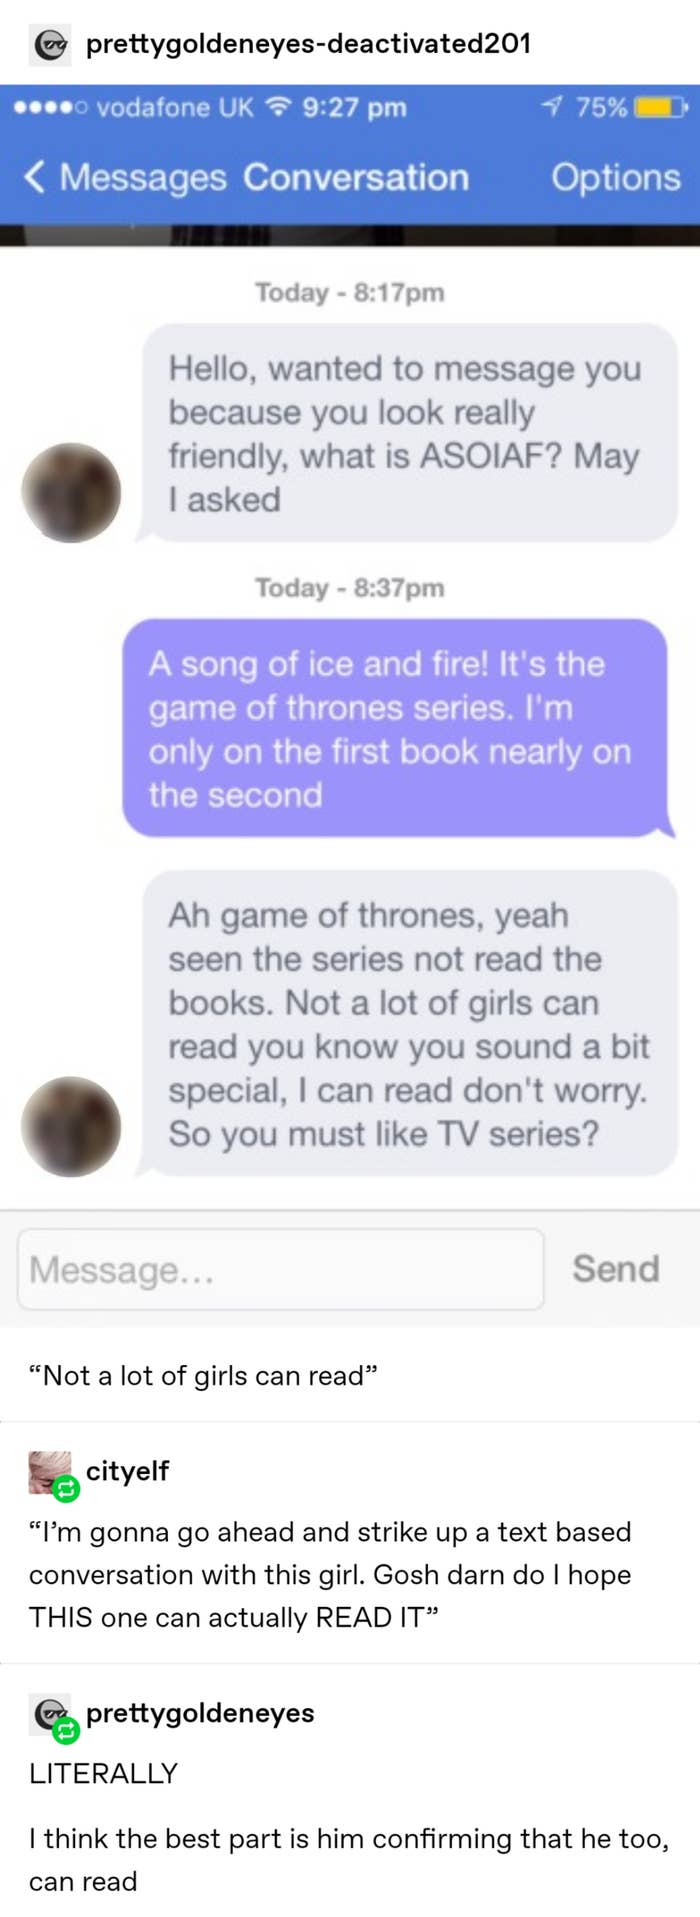 A text conversation where someone offers that they reading a book and a man responds that she must be special because most girls can&#x27;t read